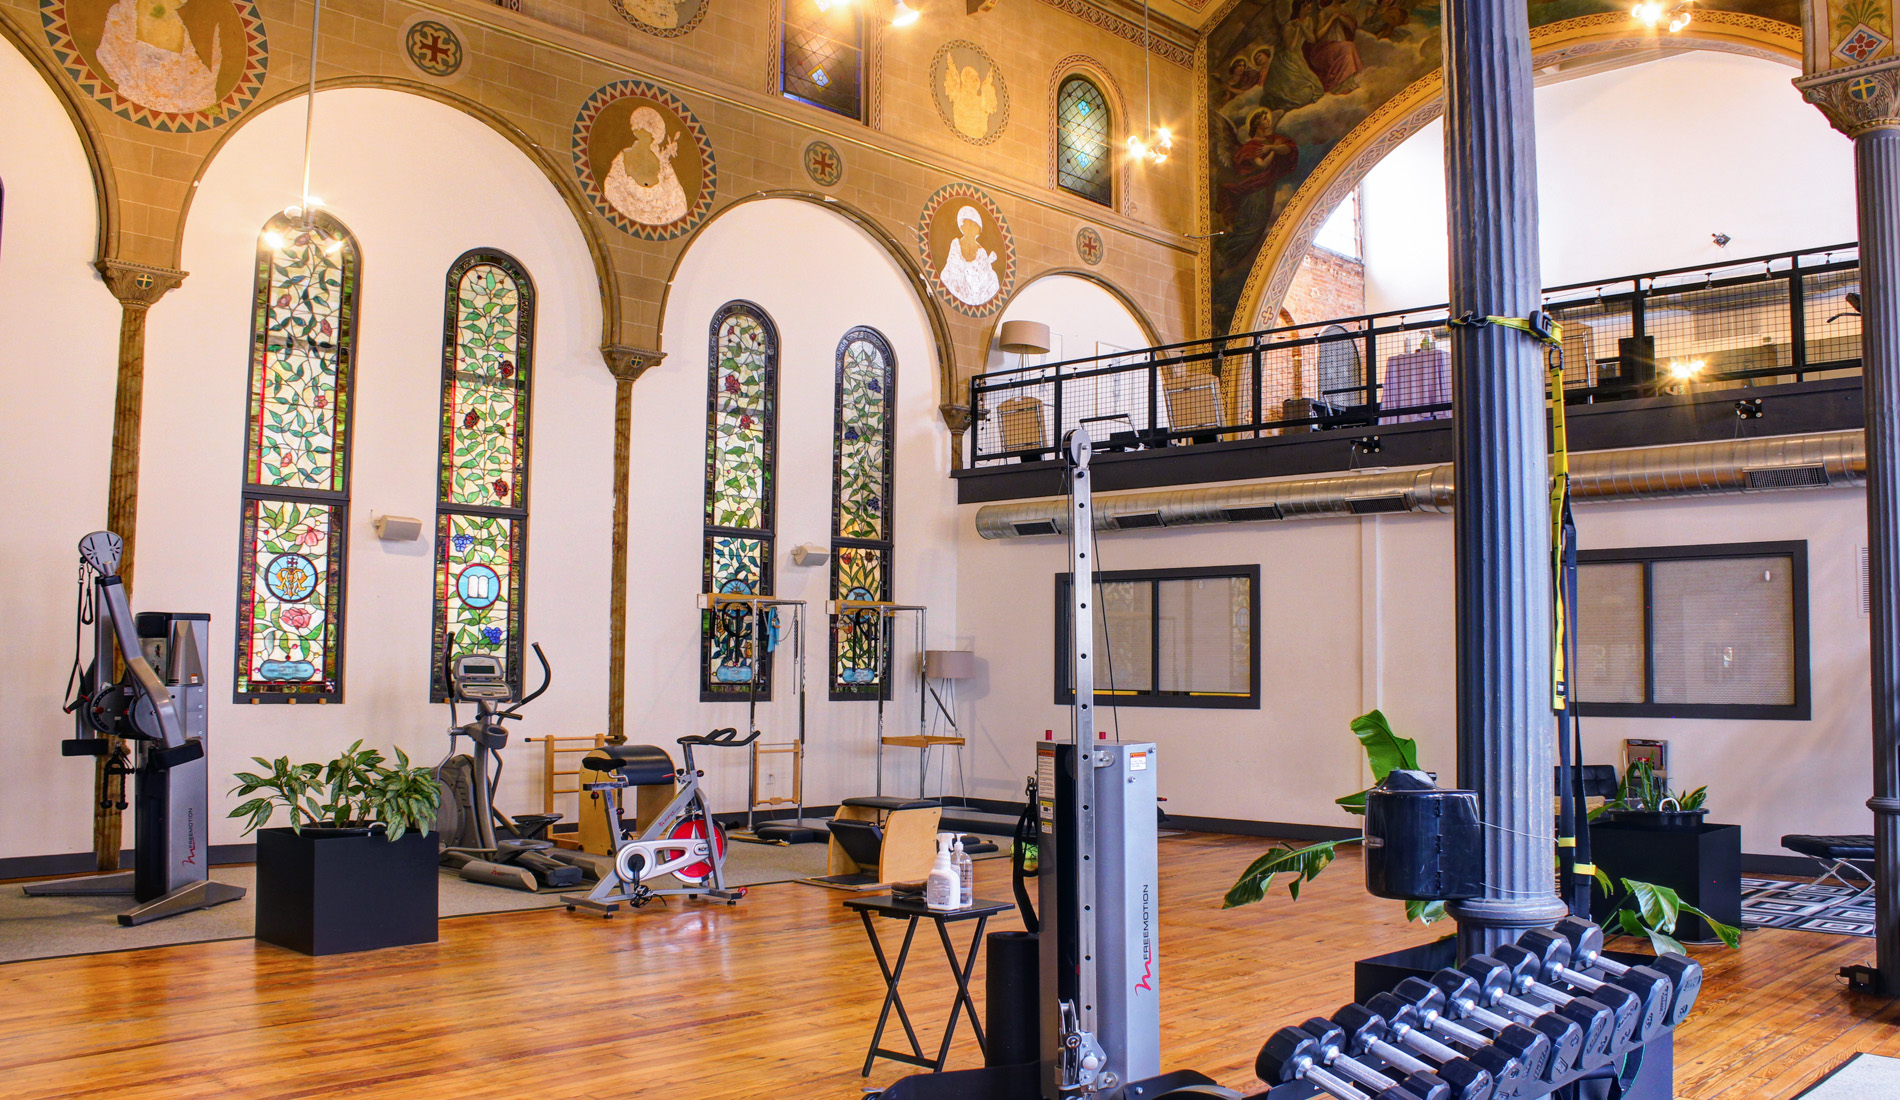 The Sanctuary Body studio - fitness equipment amidst stained glass and murals